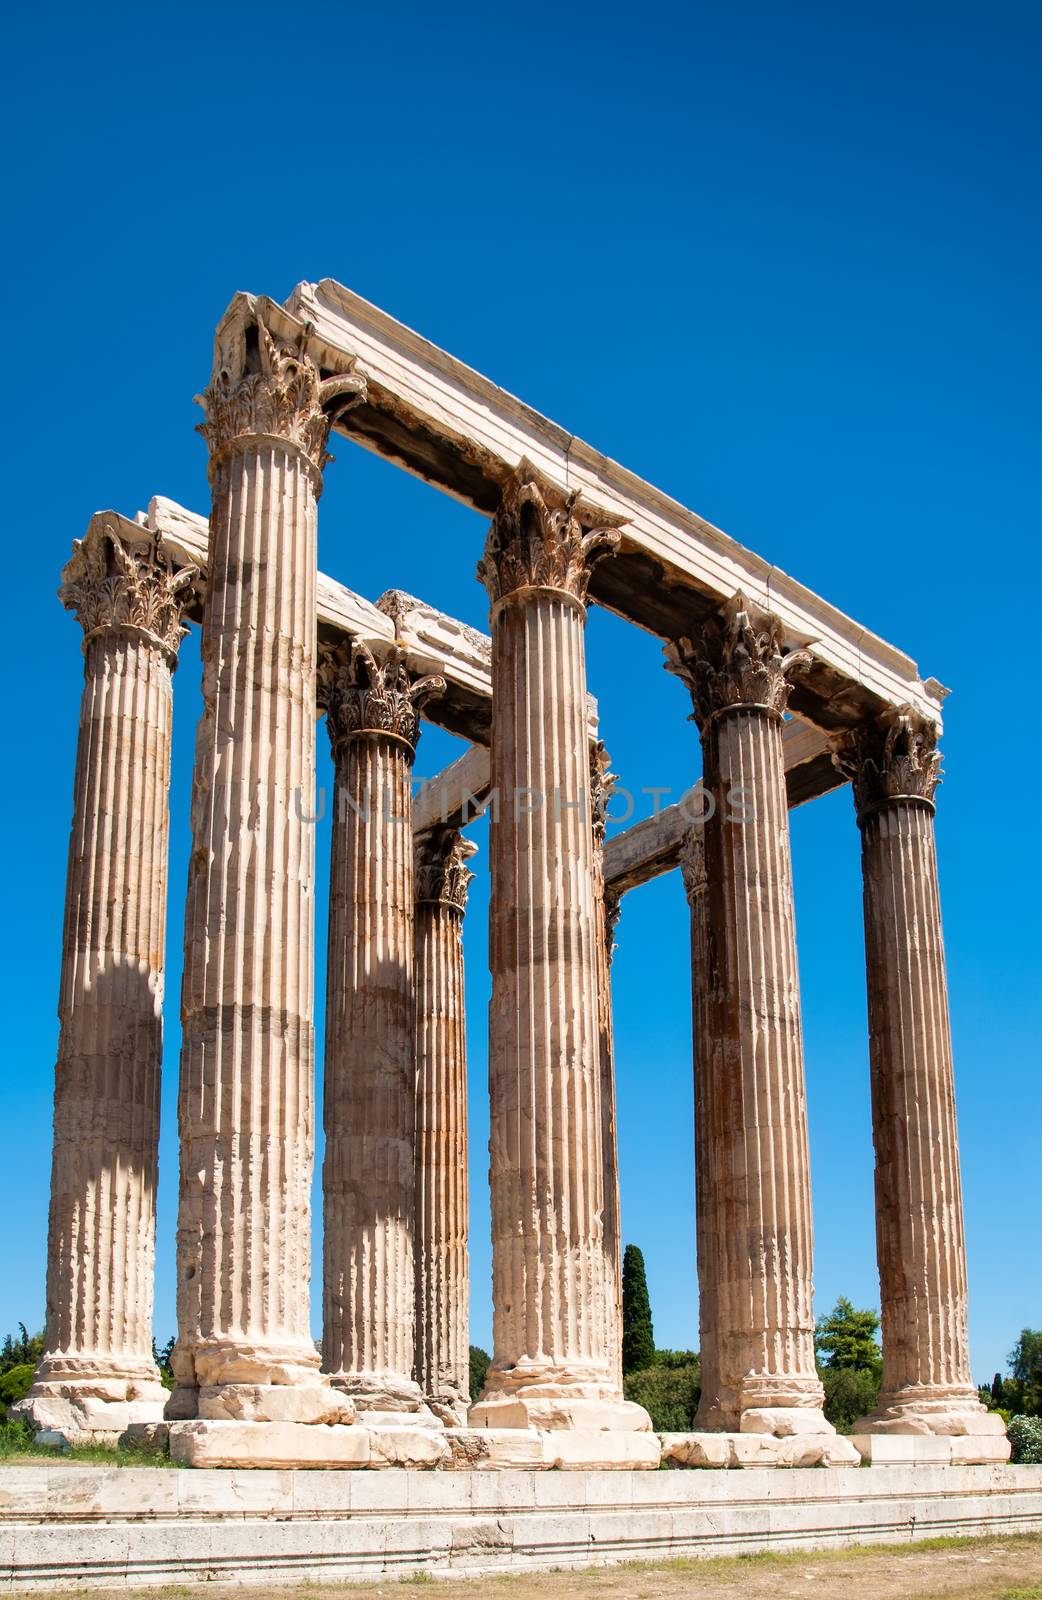 The Temple of Olympian Zeus in Athens by mitakag